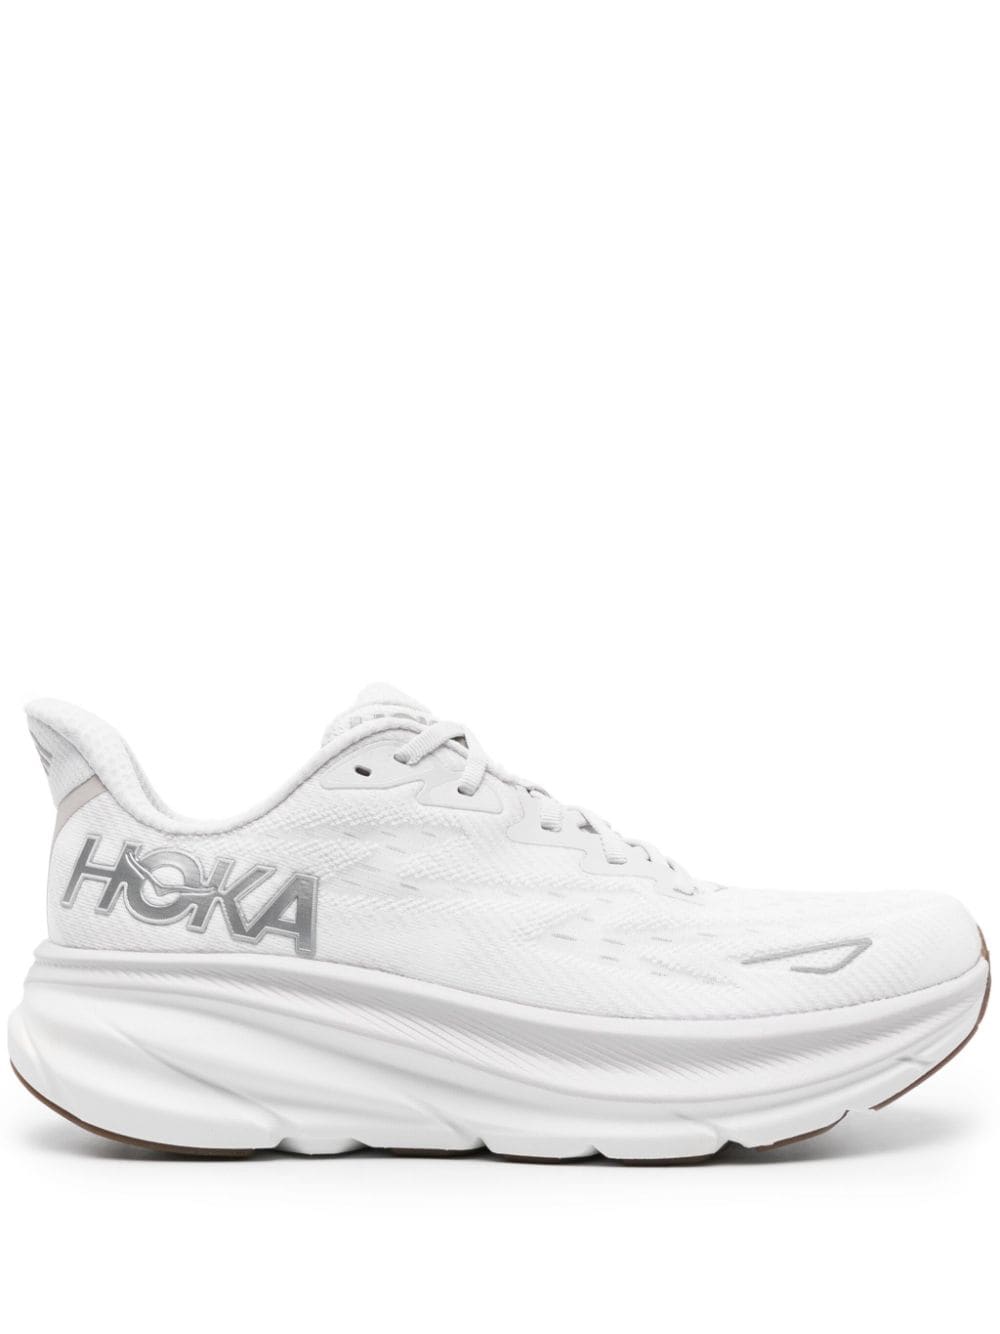 Hoka Clifton 9 Lace-up Sneakers In Gray